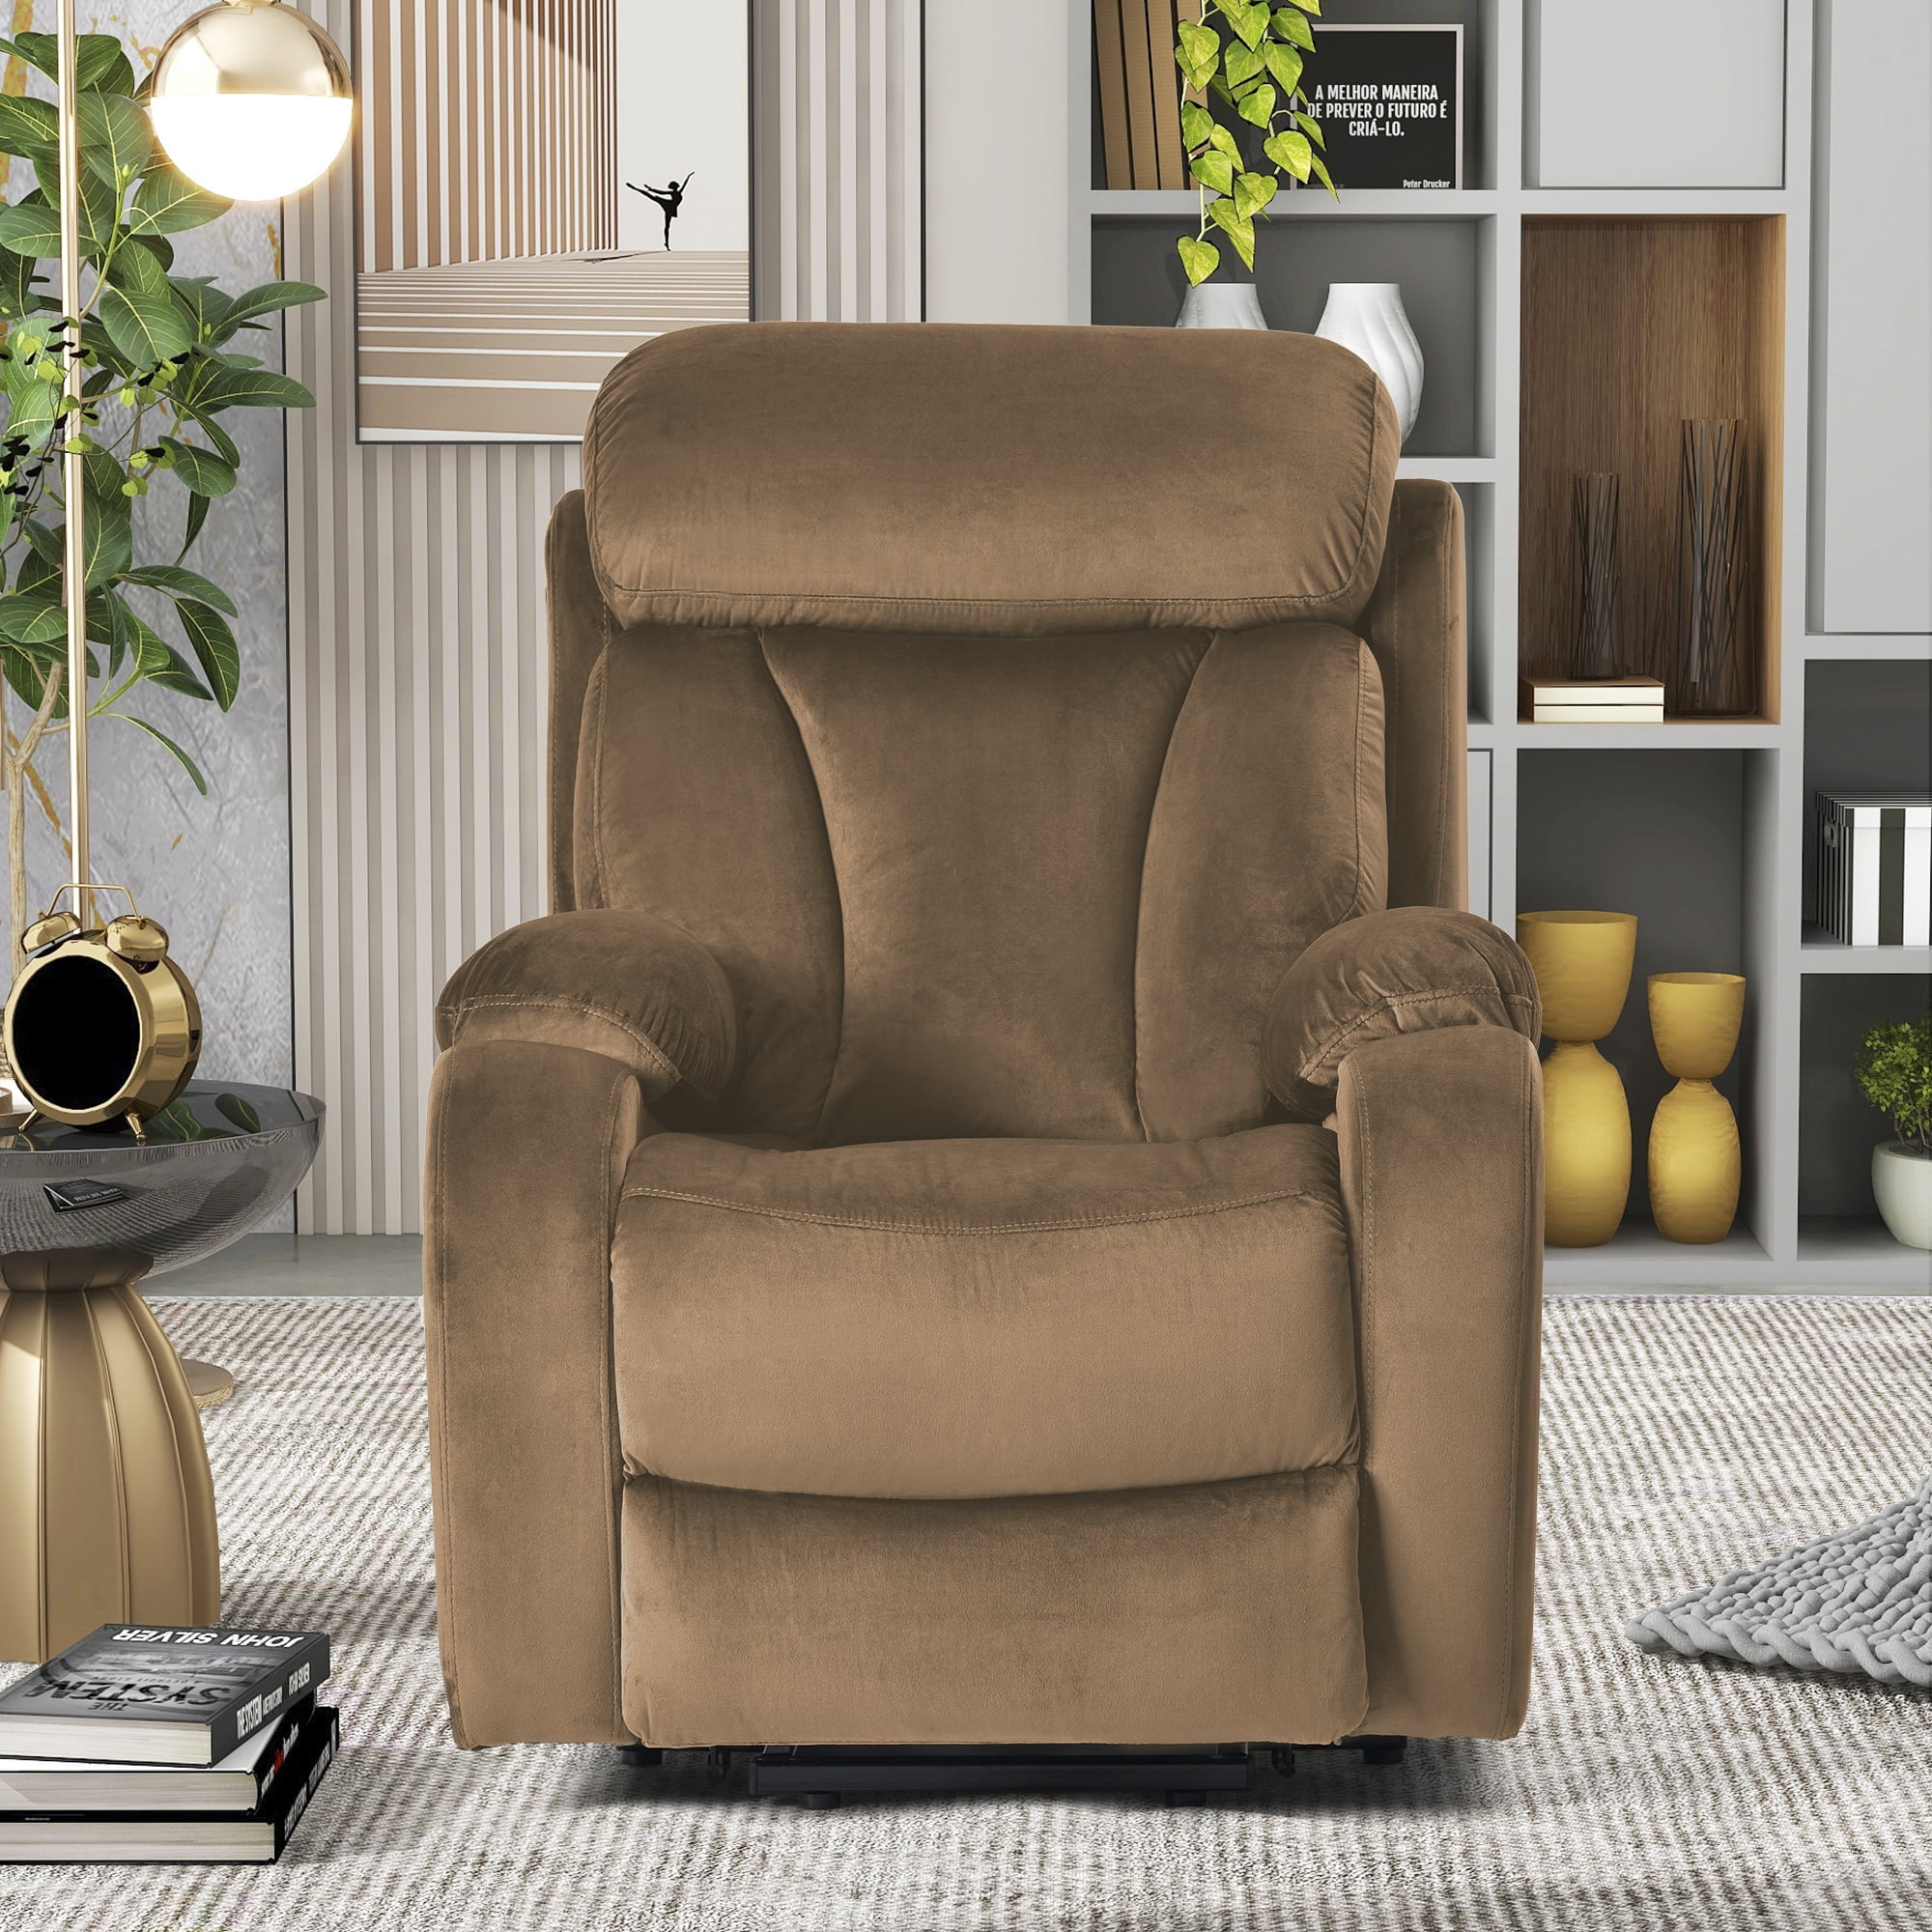 Upholstery Elderly Recliner Chair with Padded Seat Adjustable